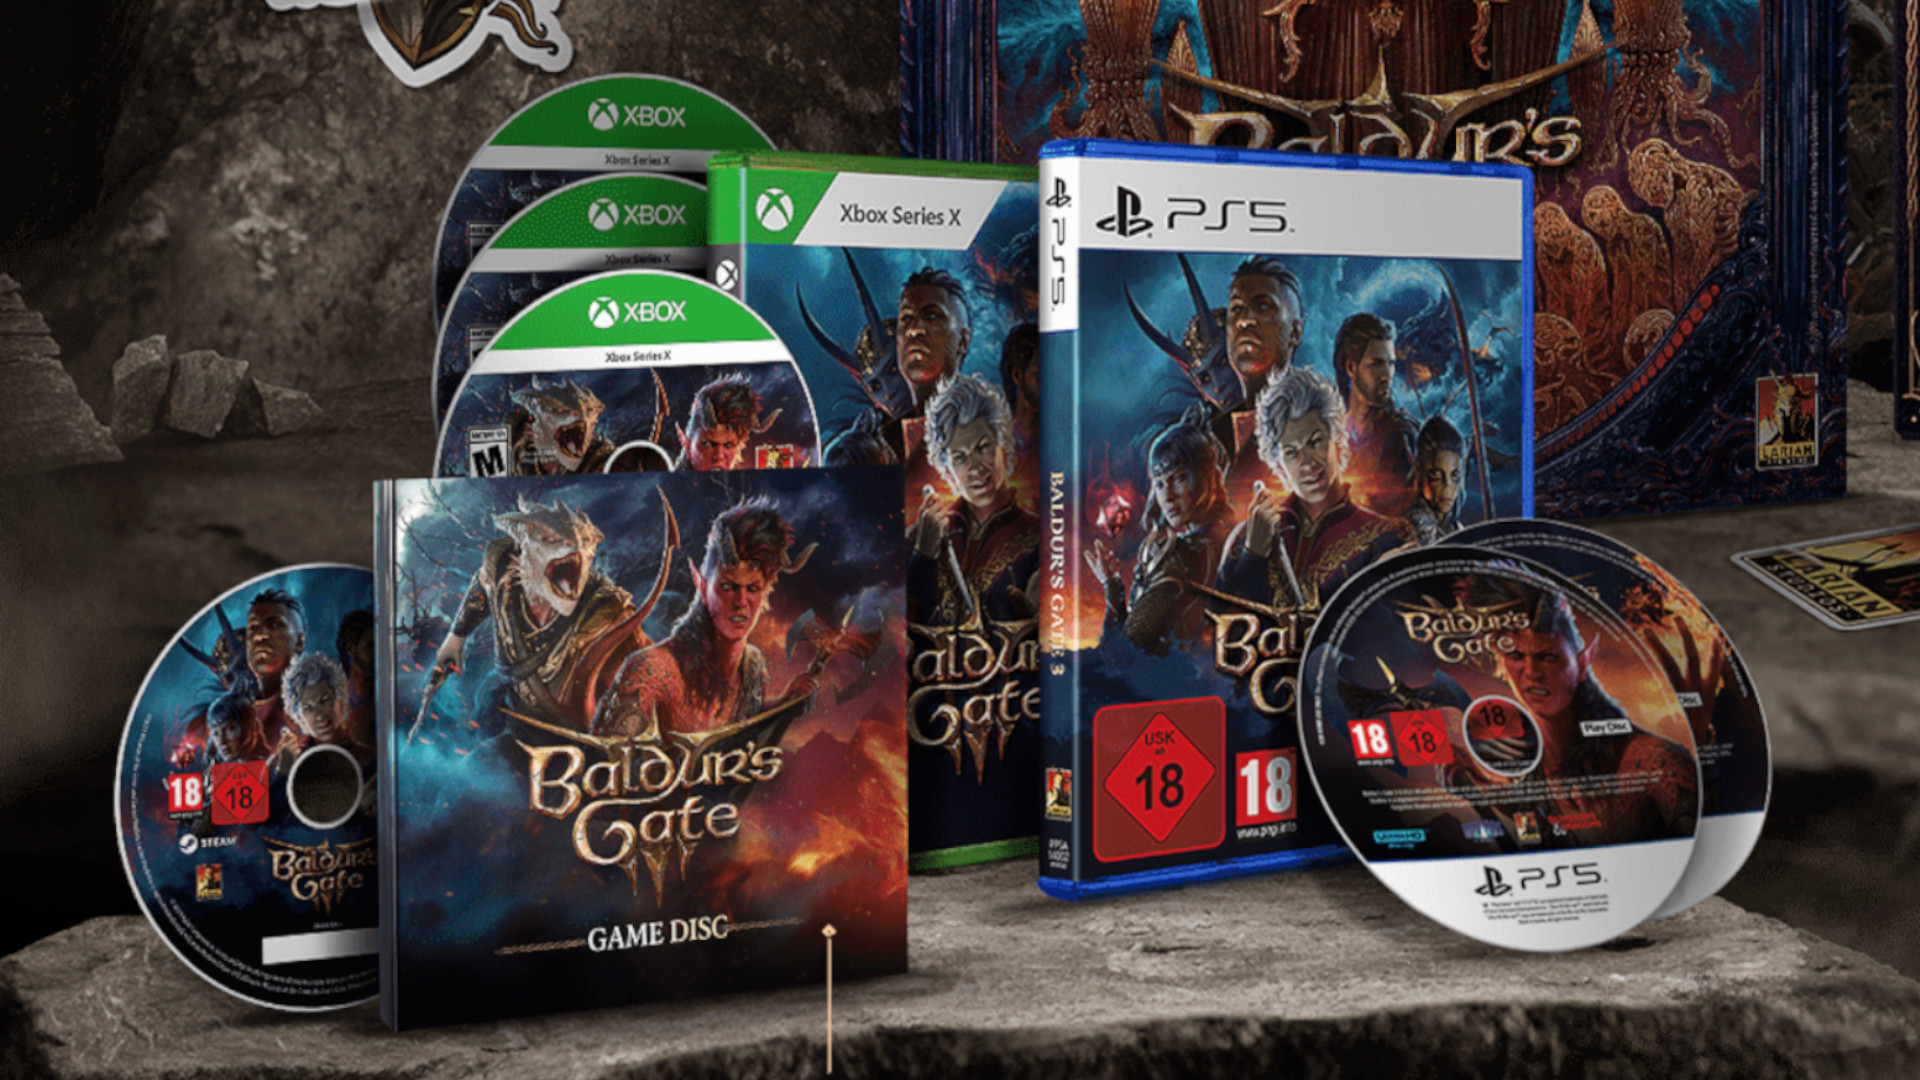 Baldur's Gate 3 Is The Most Pre-Ordered Game on PS5